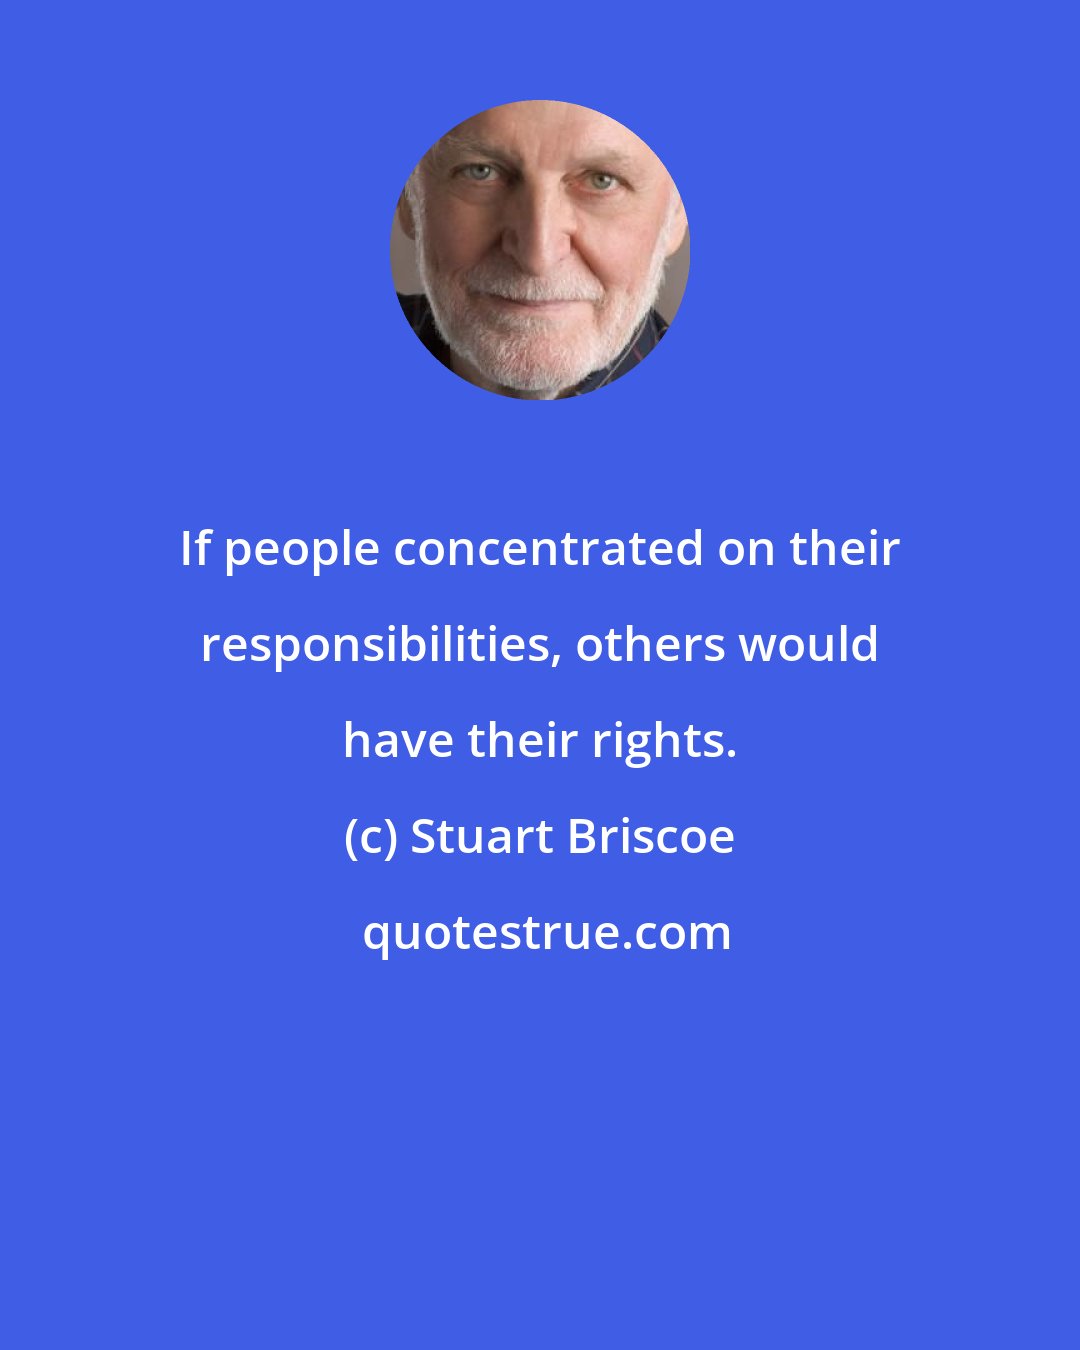 Stuart Briscoe: If people concentrated on their responsibilities, others would have their rights.